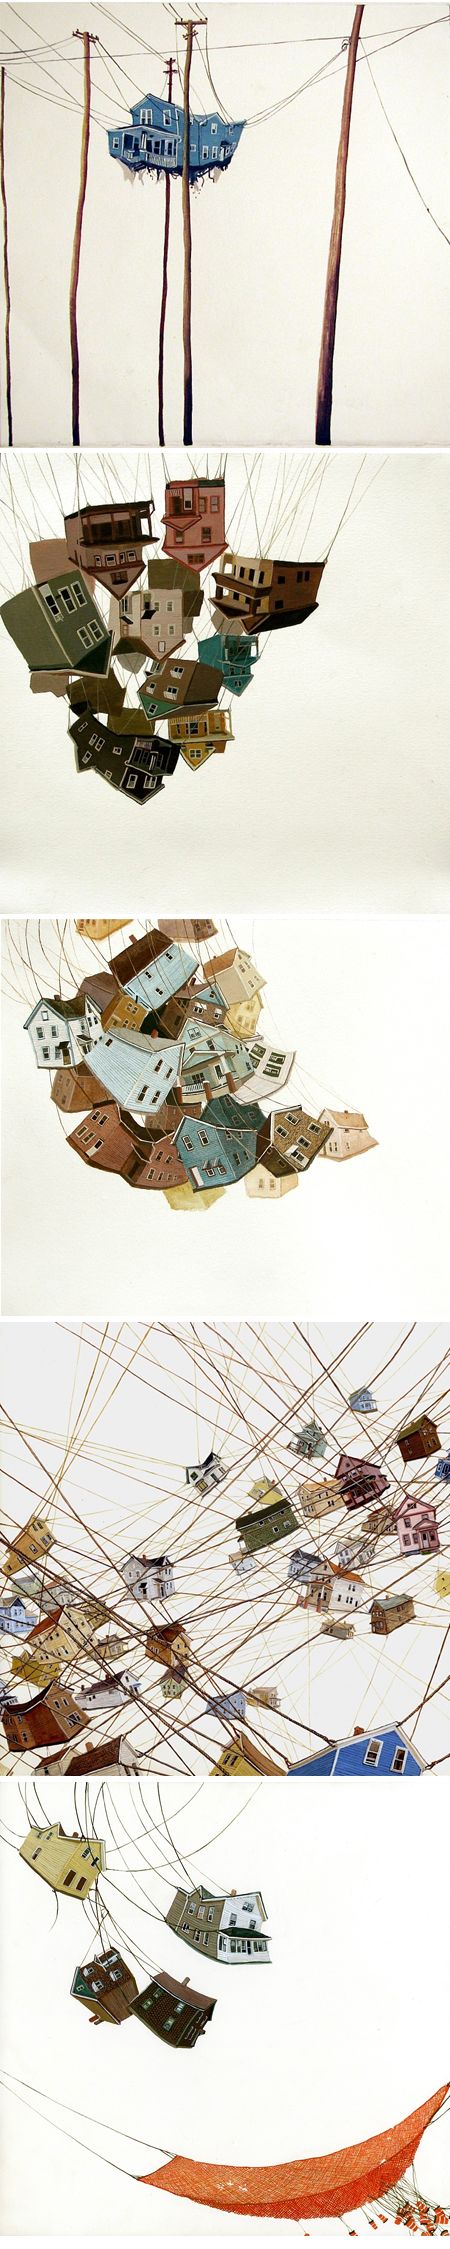 Amy Casey. As featured on The Jealous Curator. Love that site!